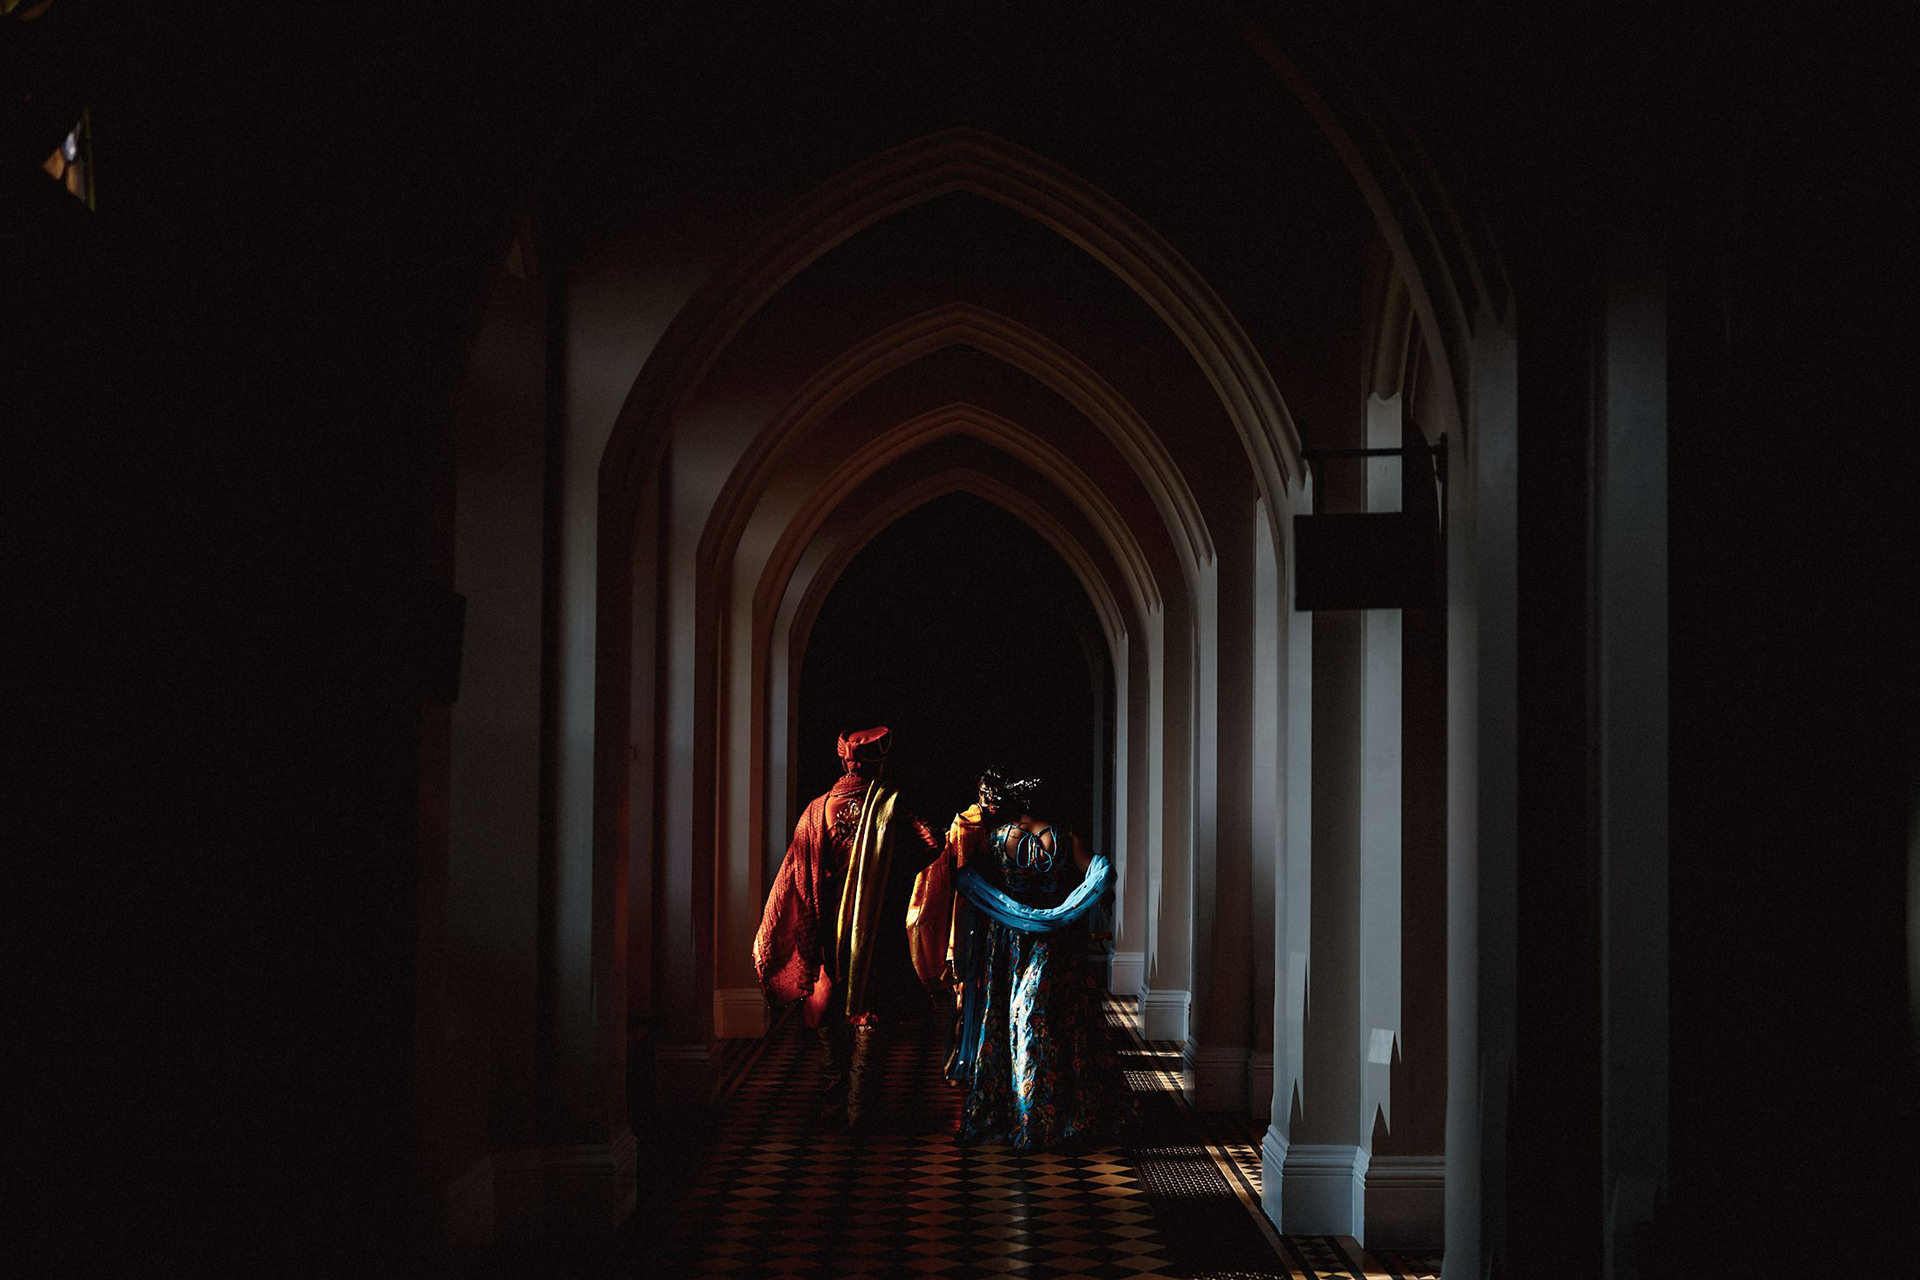 nice light in the corridors of the abbey